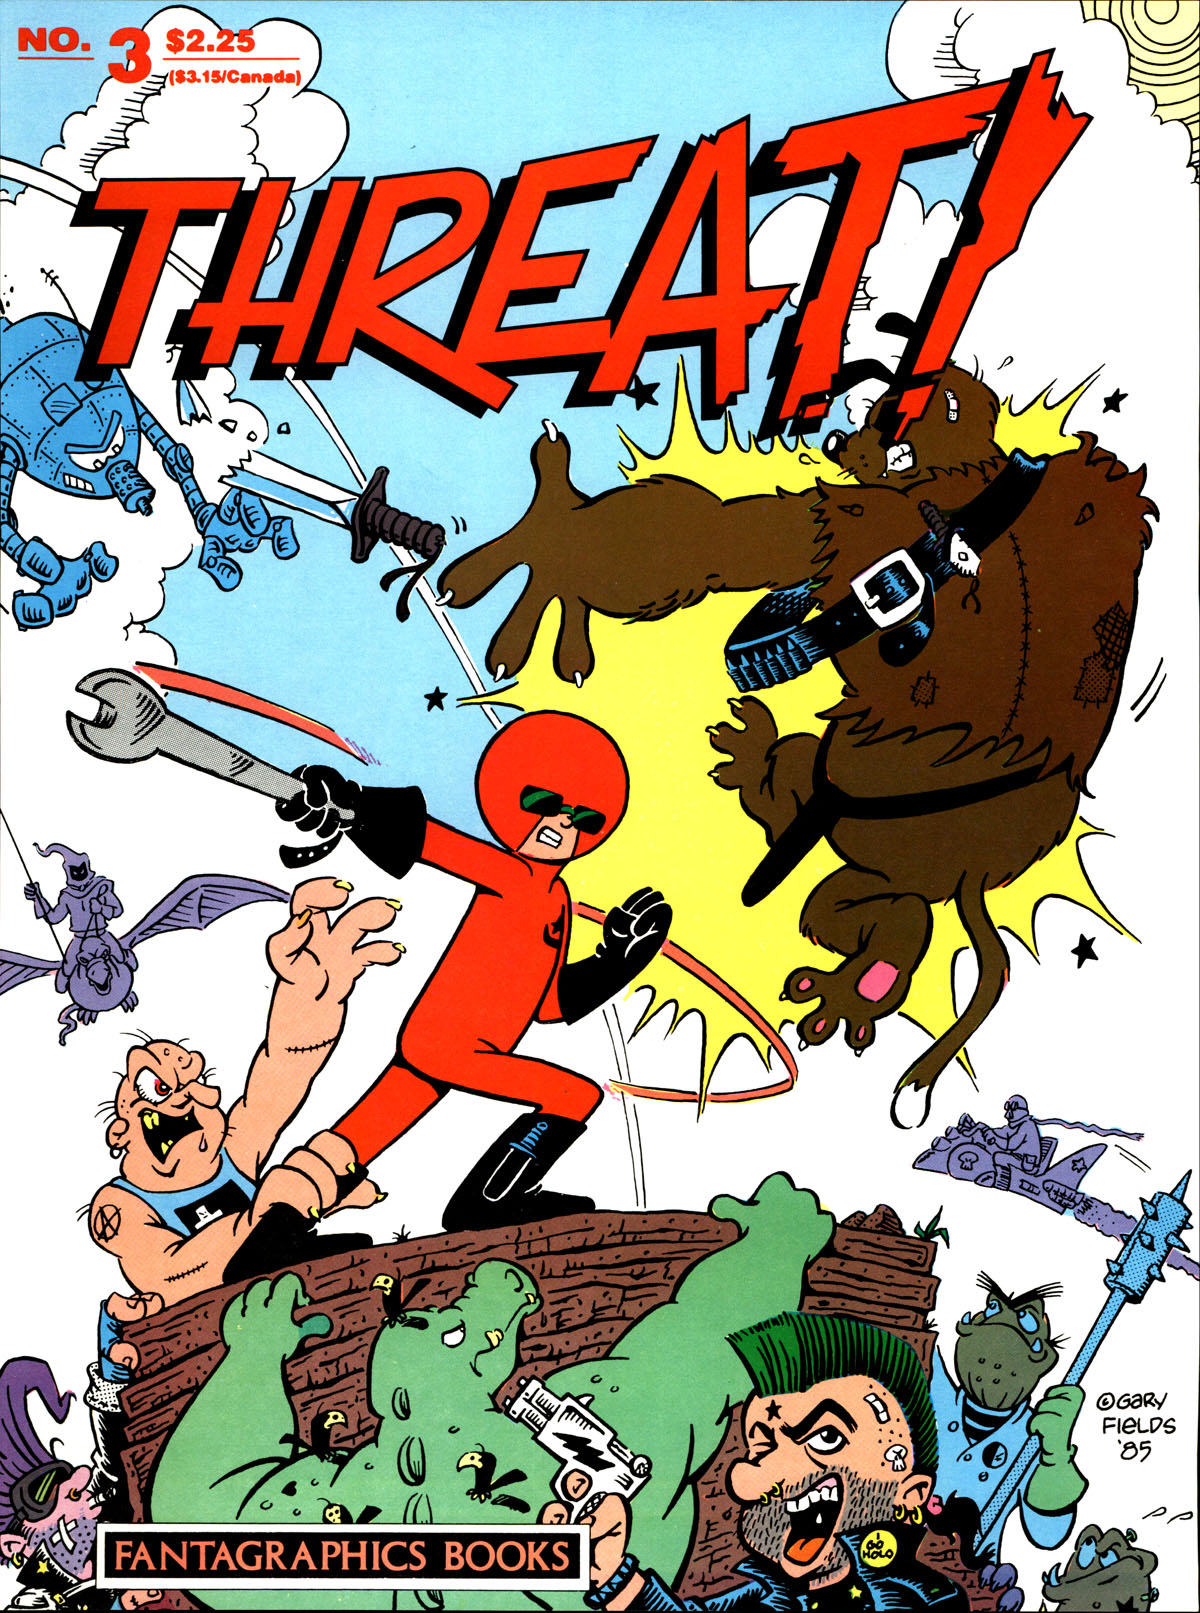 Read online Threat comic -  Issue #3 - 1